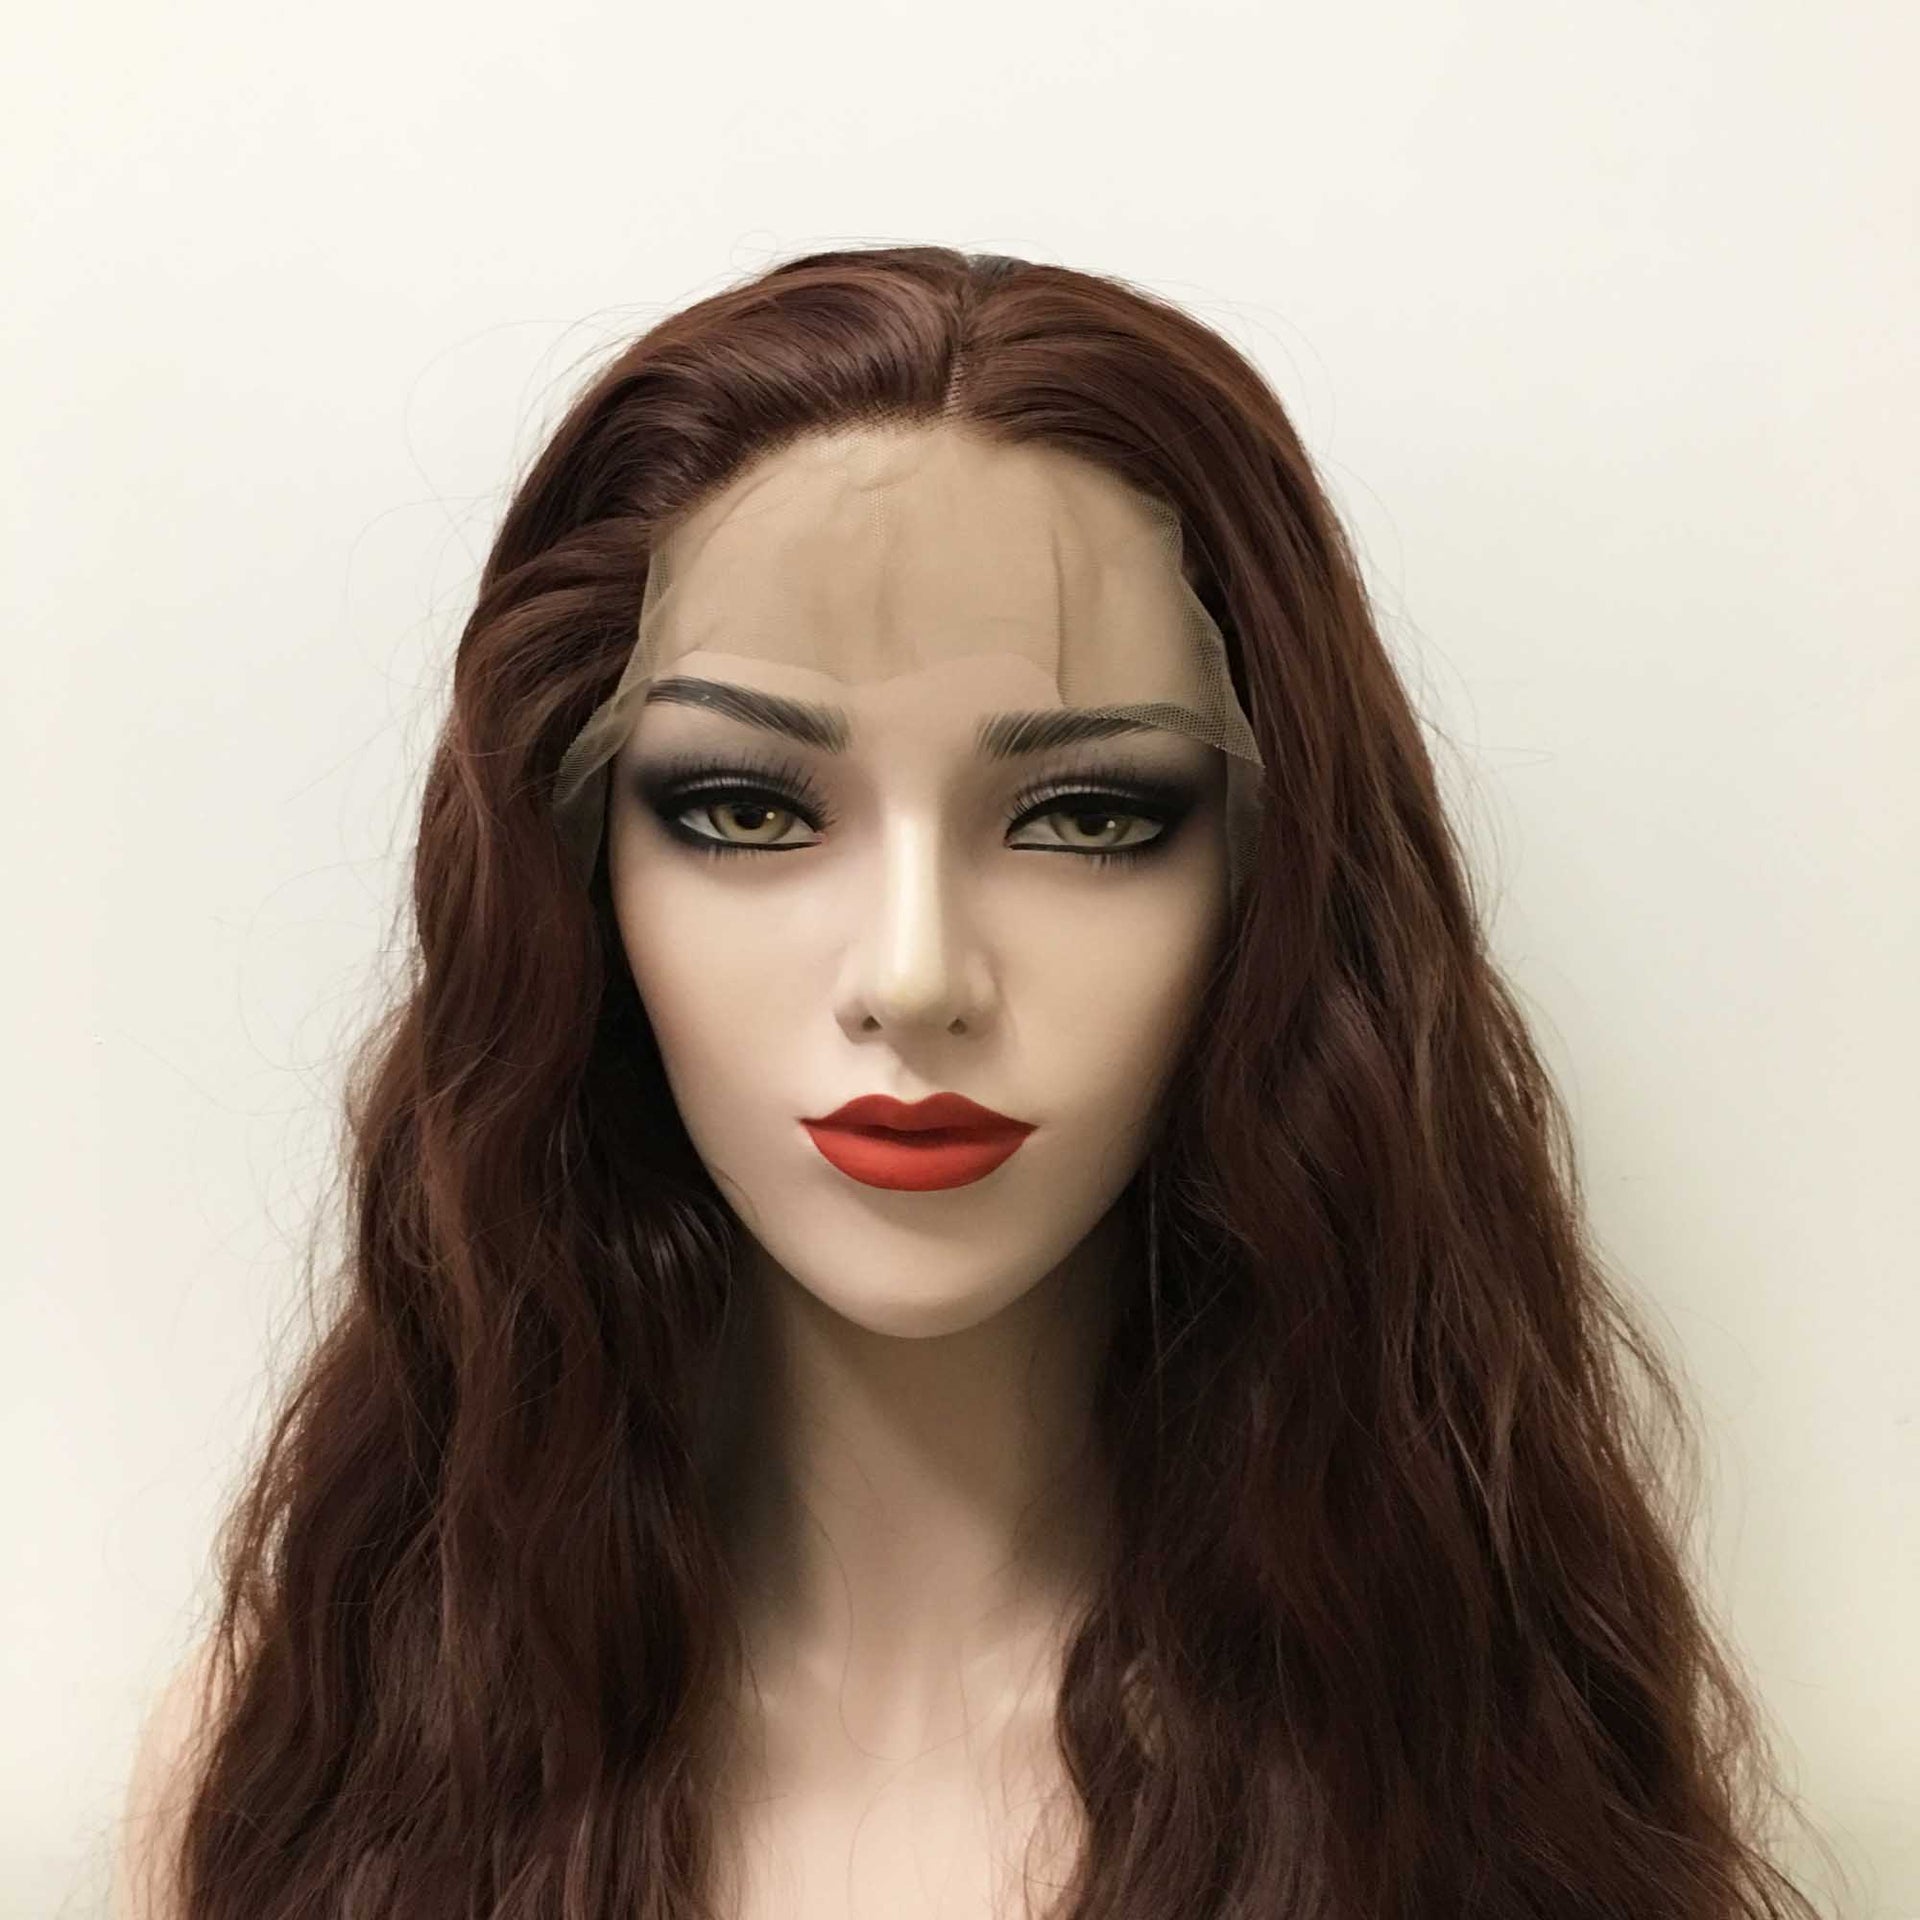 nevermindyrhead Women Lace Front Dark Brown Middle Part Long Curly Thick Volume Wig